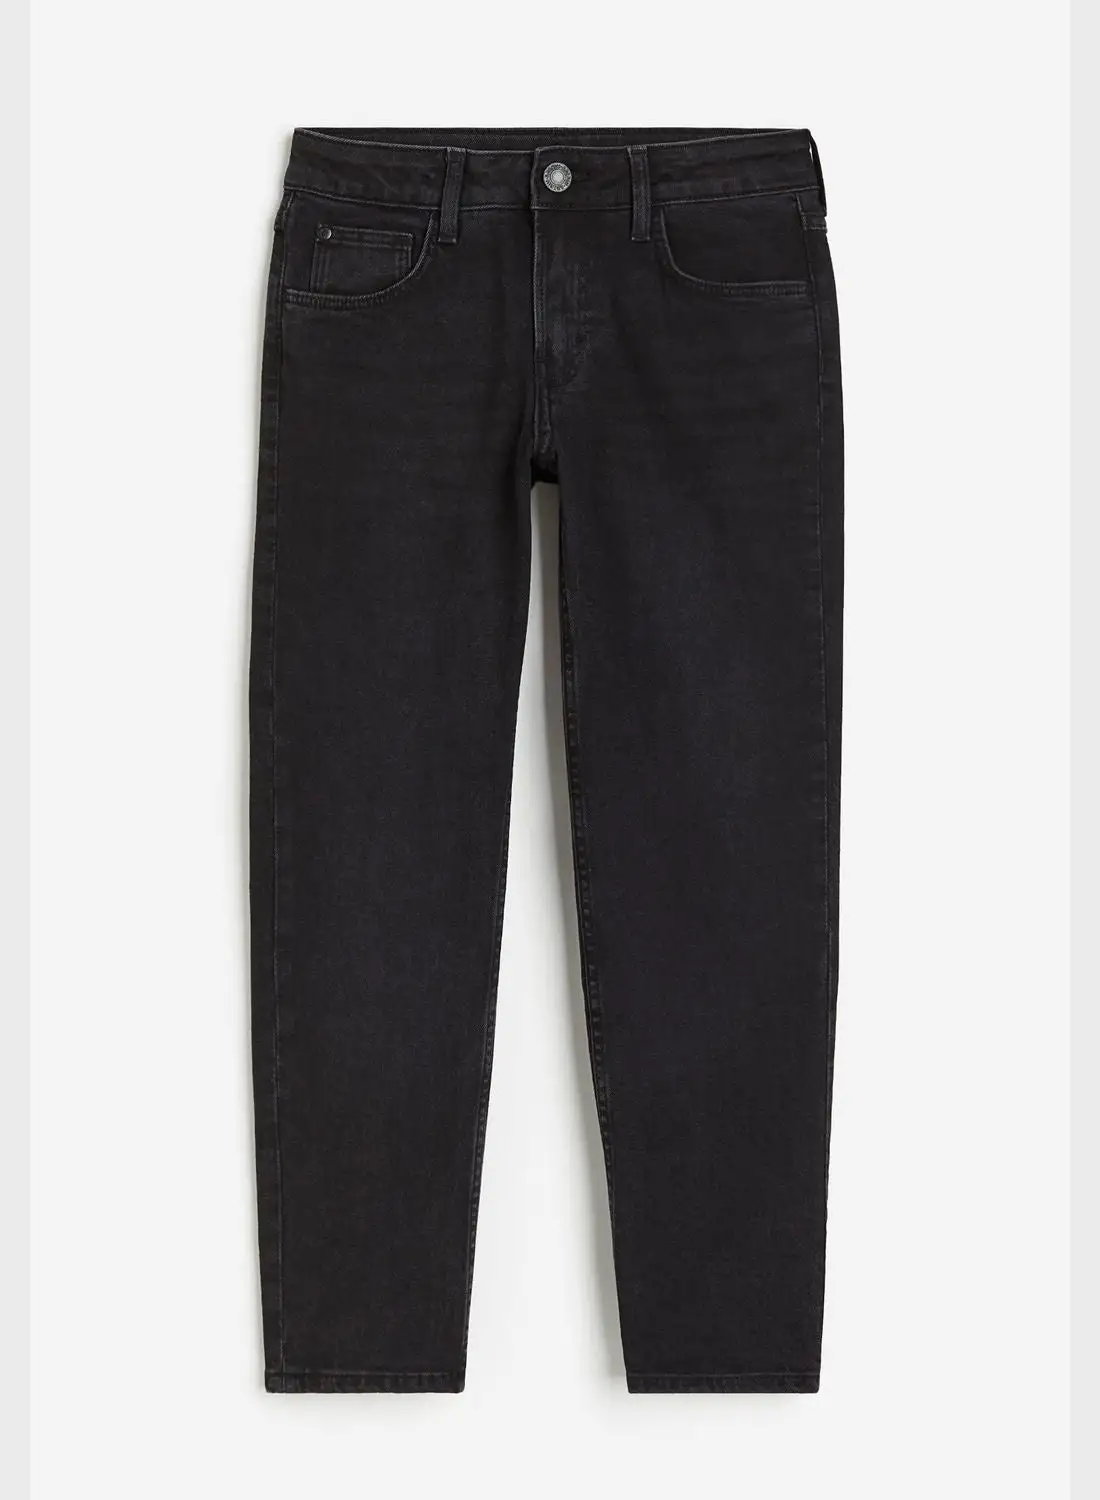 H&M Youth Relaxed Tapered Fit Jeans